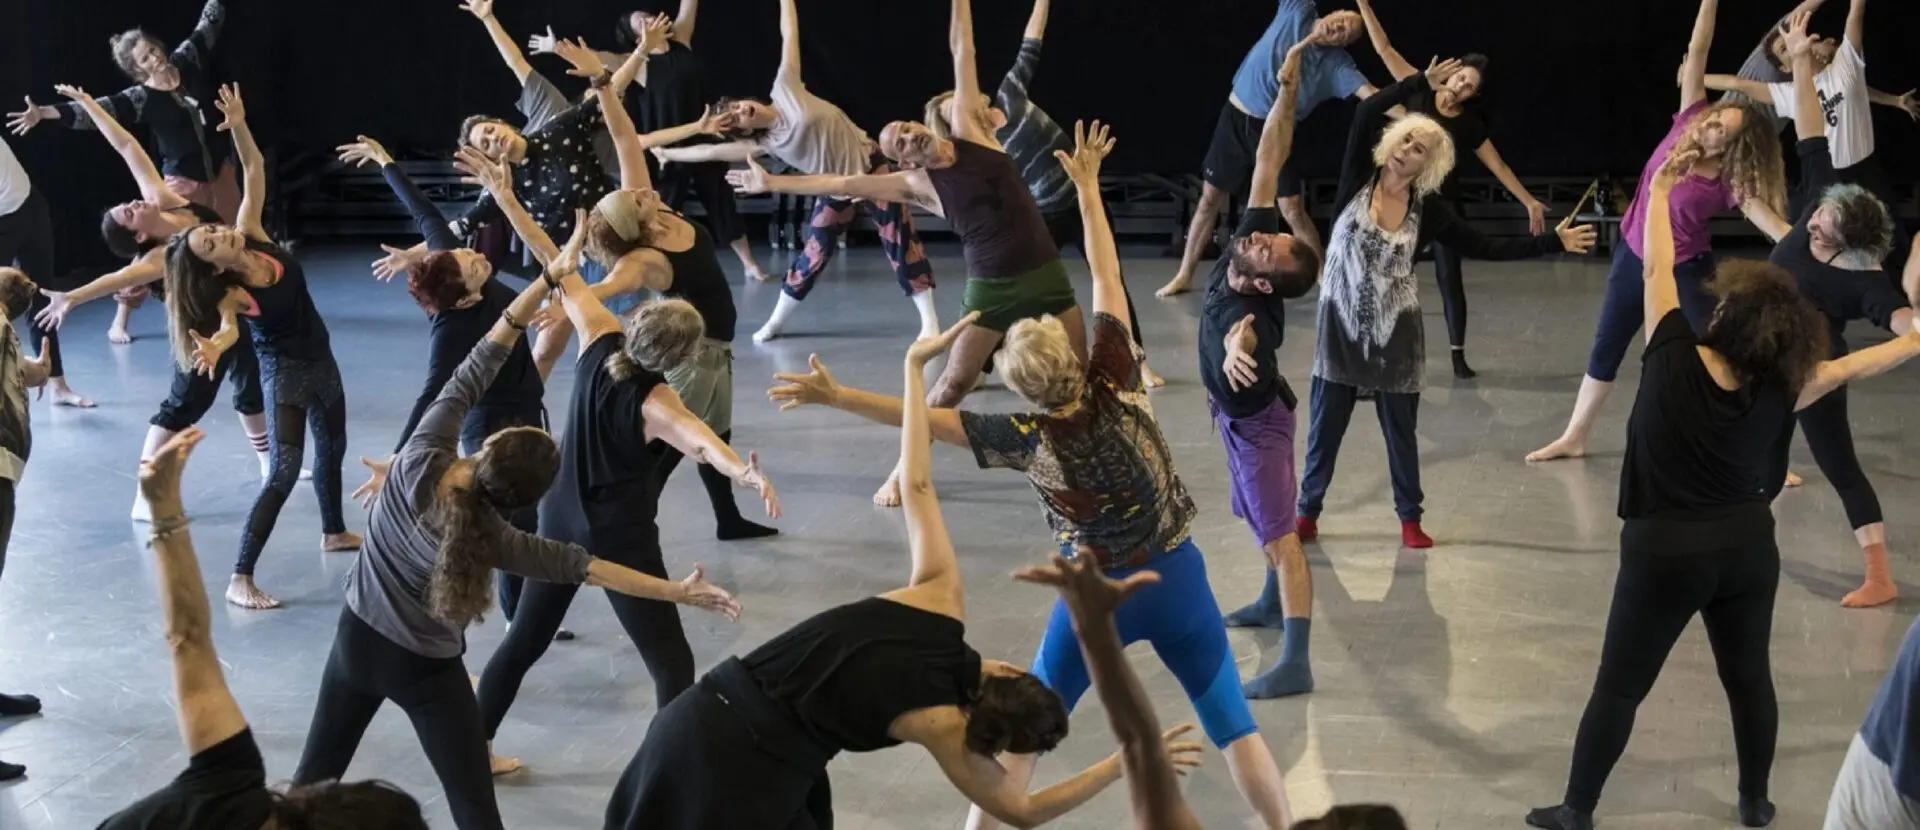 A group of people are engaged in a dance class, performing various expressive movement poses on a gray studio floor. They are barefoot and dressed in casual dance attire.